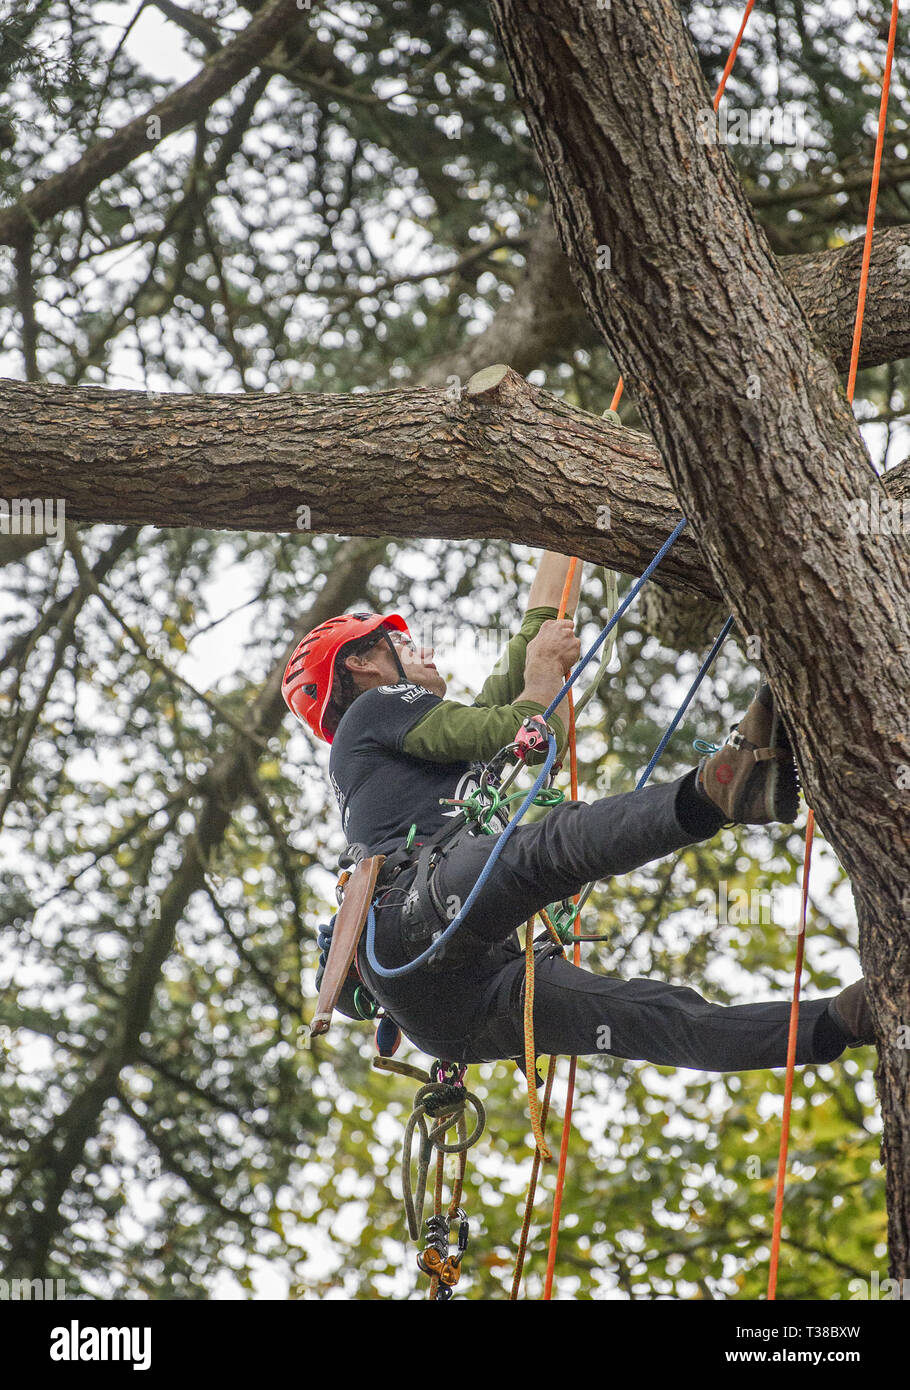 Christchurch, Canterbury, New Zealand. 7th Apr, 2019. Five time New Zealand tree climbing champion SCOTT FORREST of Kawerau (NZ) competes in the Asia-Pacific Tree Climbing Masters' Challenge Championships in the Christchurch Botanic Gardens. Competitors vie in a series of tests of agility, speed and skill. Forrest finished second in the competition. Credit: PJ Heller/ZUMA Wire/Alamy Live News Stock Photo